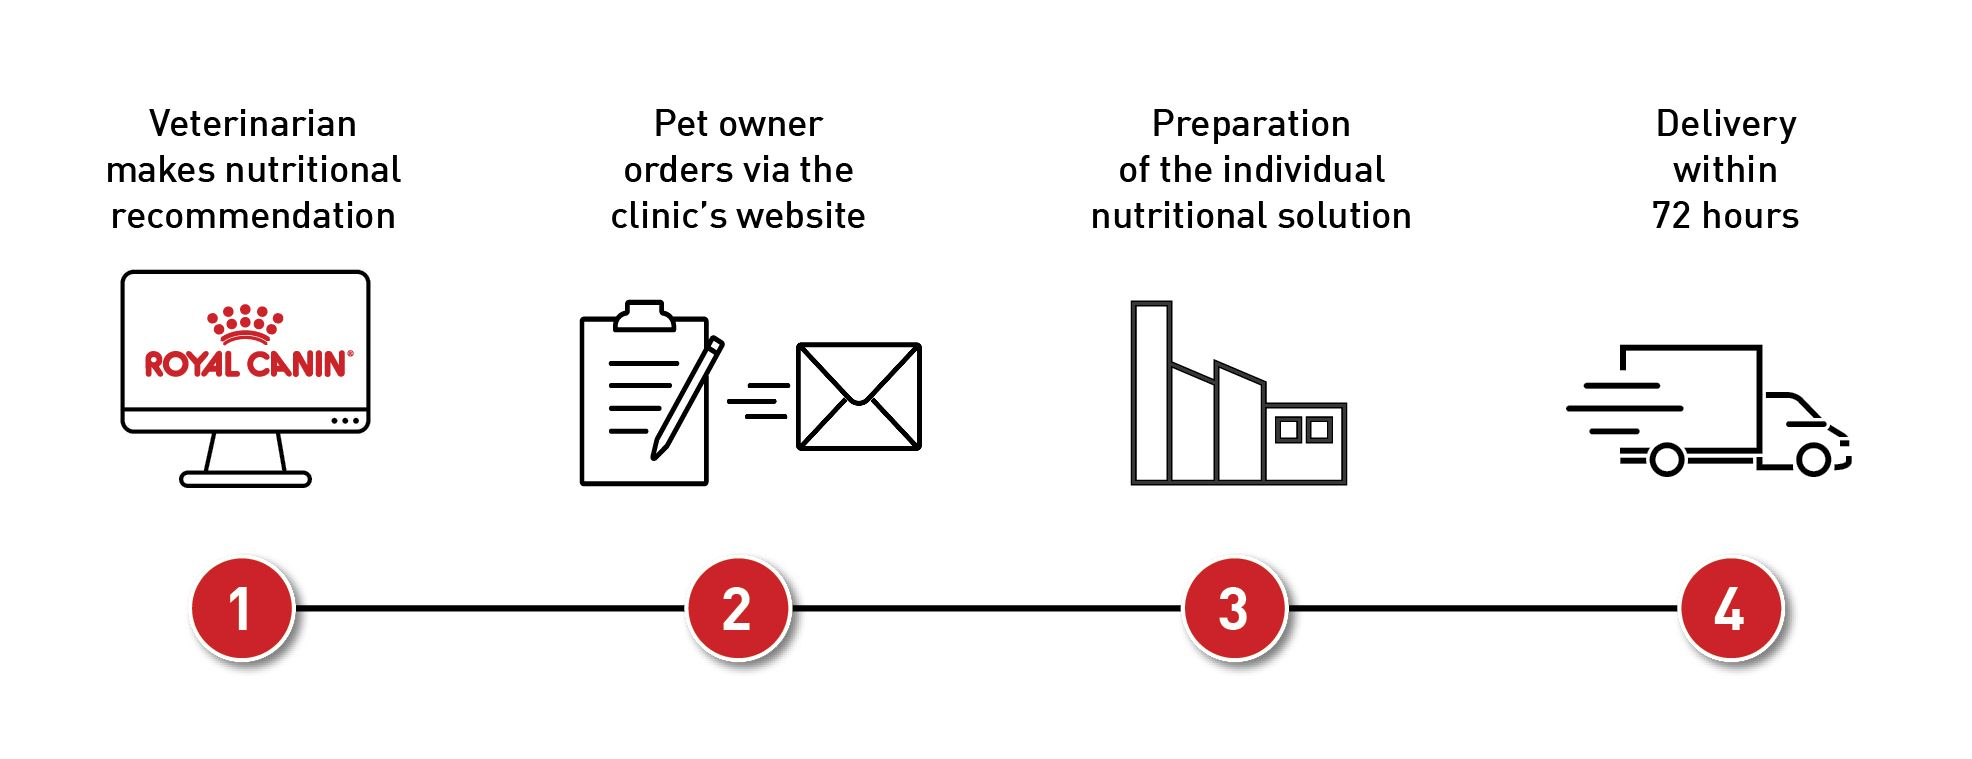 The four steps in achieving a tailor-made dietary solution for an individual pet